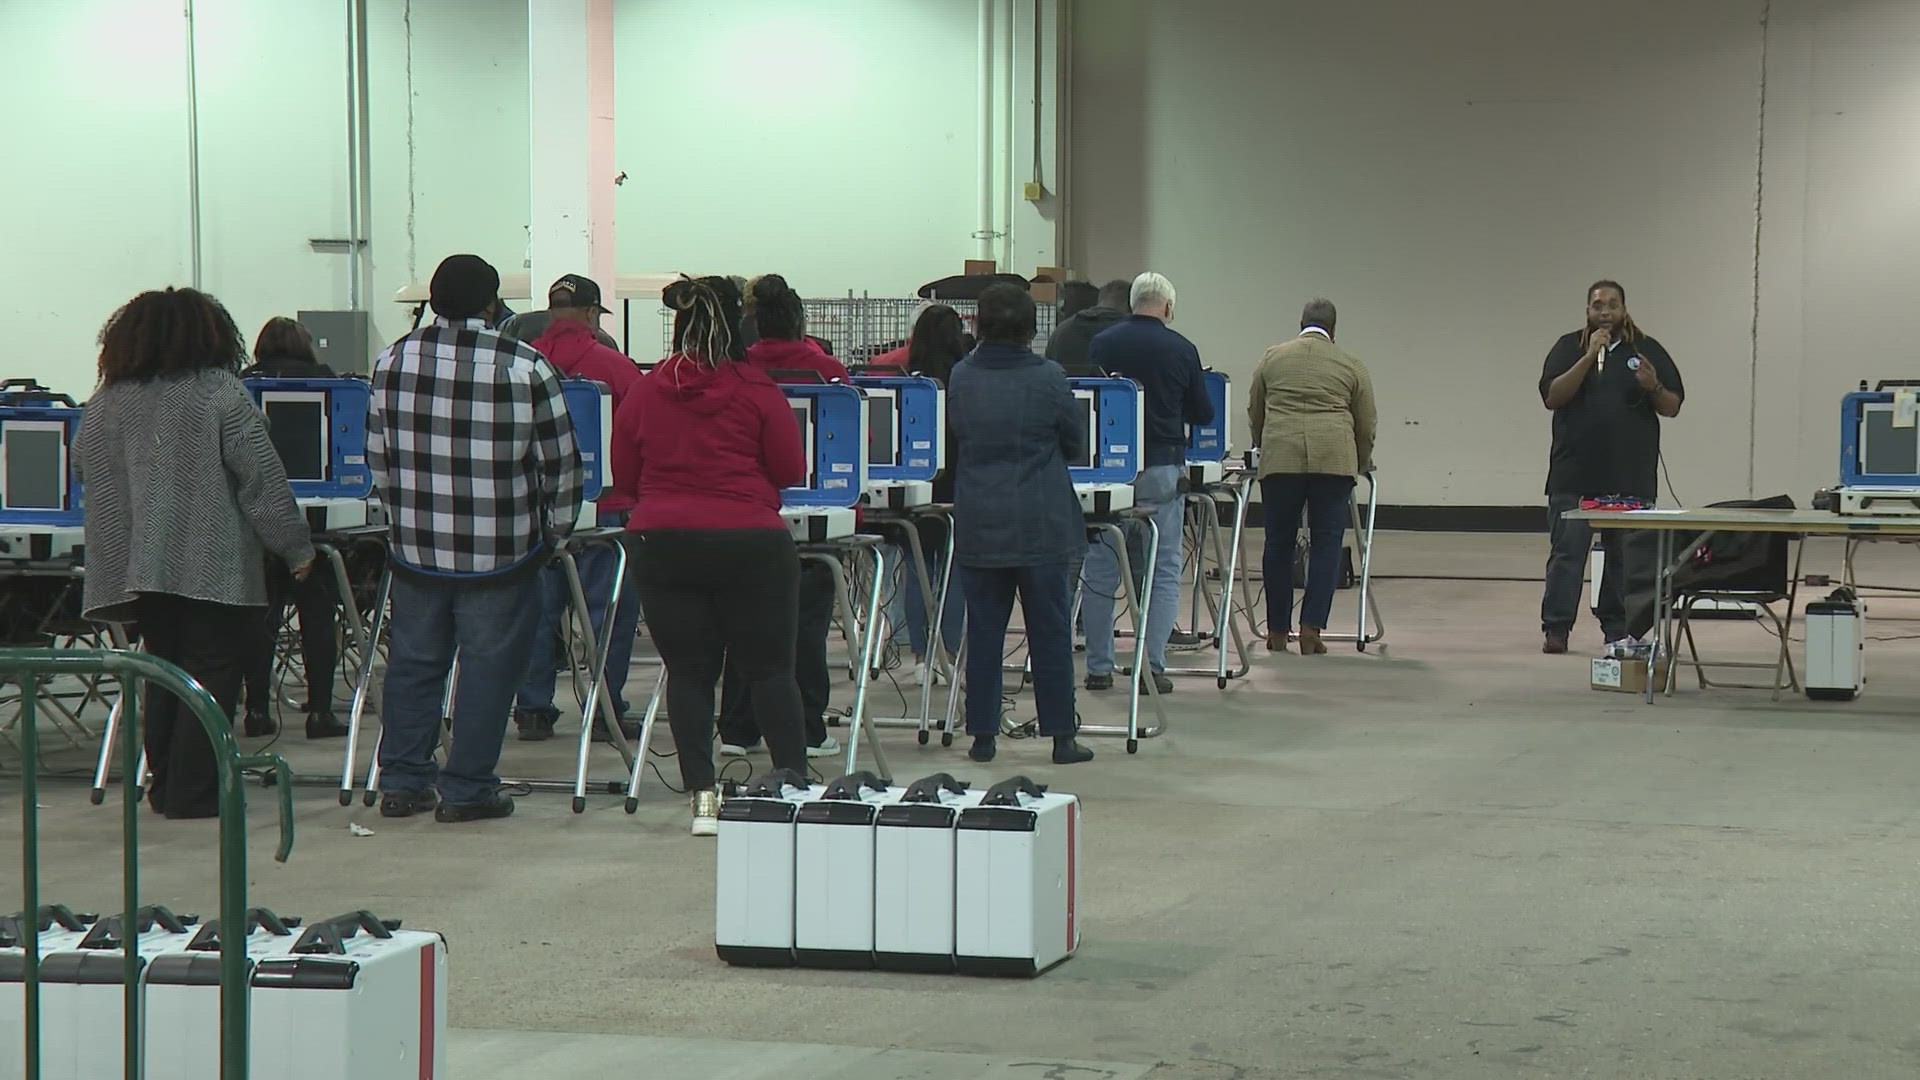 Harris County Election officials are optimistic things will run smoothly despite past issues.